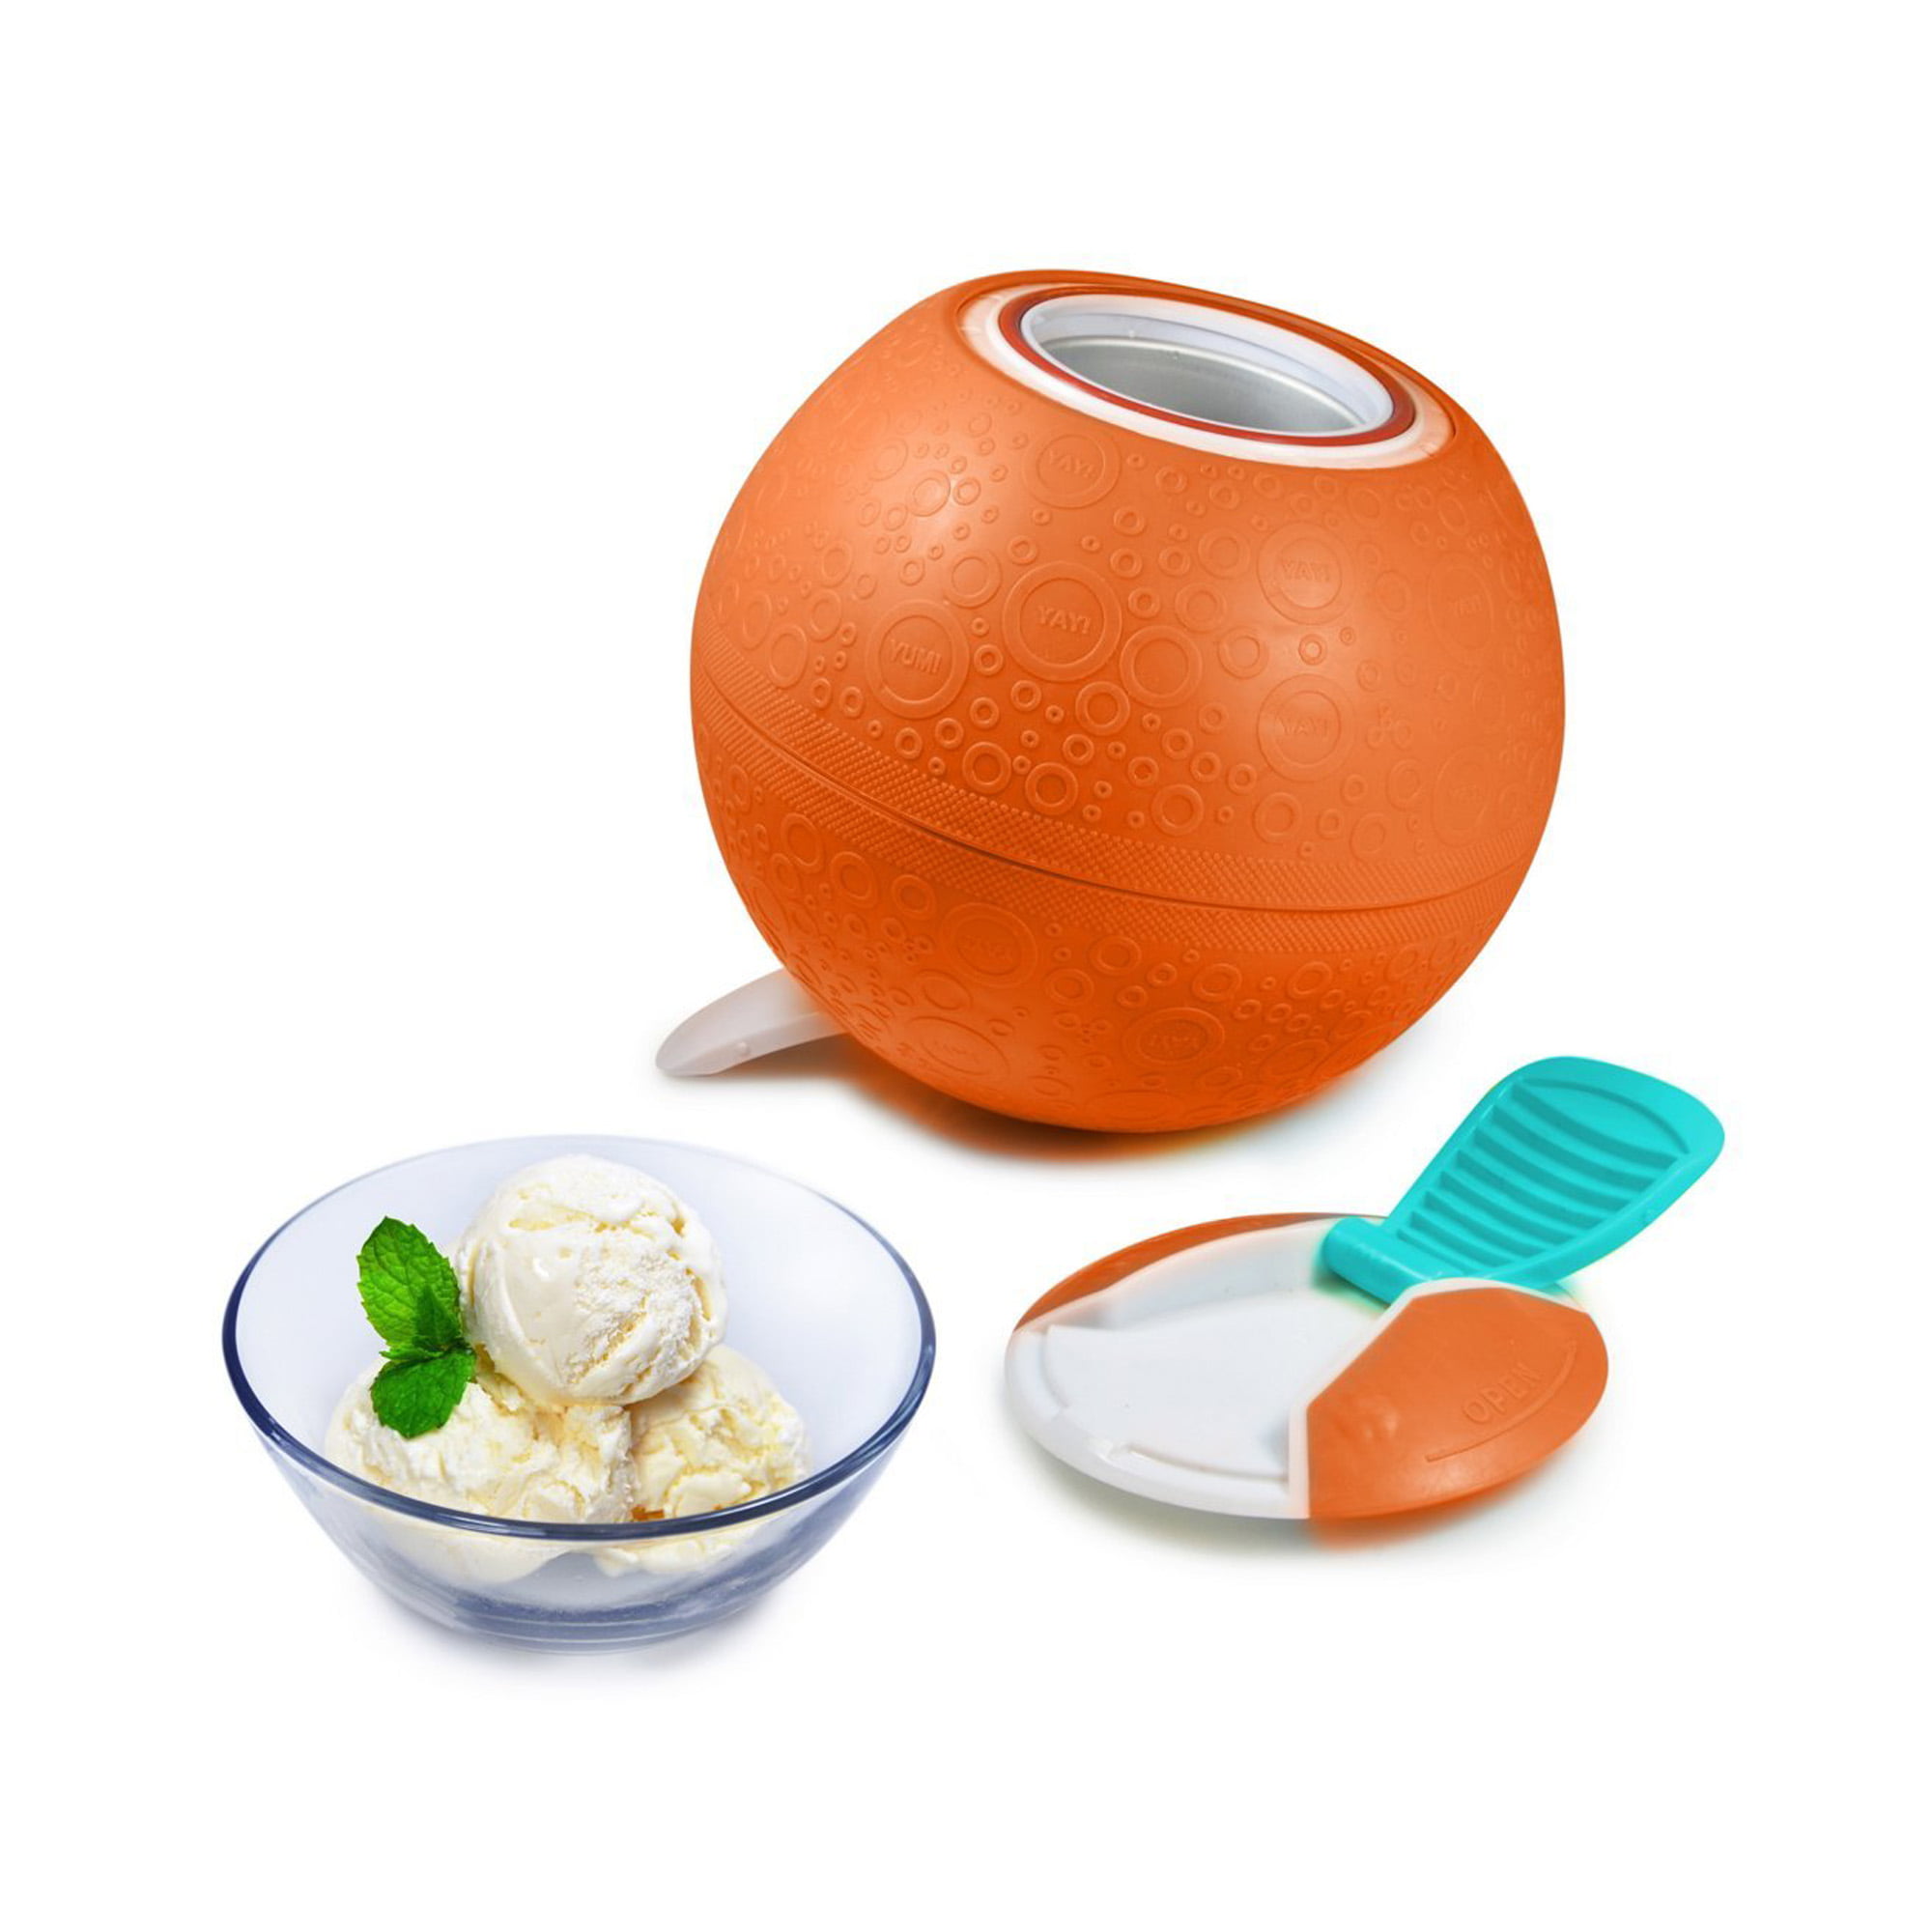 YayLabs! Ice Cream Ball review: Playtime meets dessert with this fun ice  cream maker